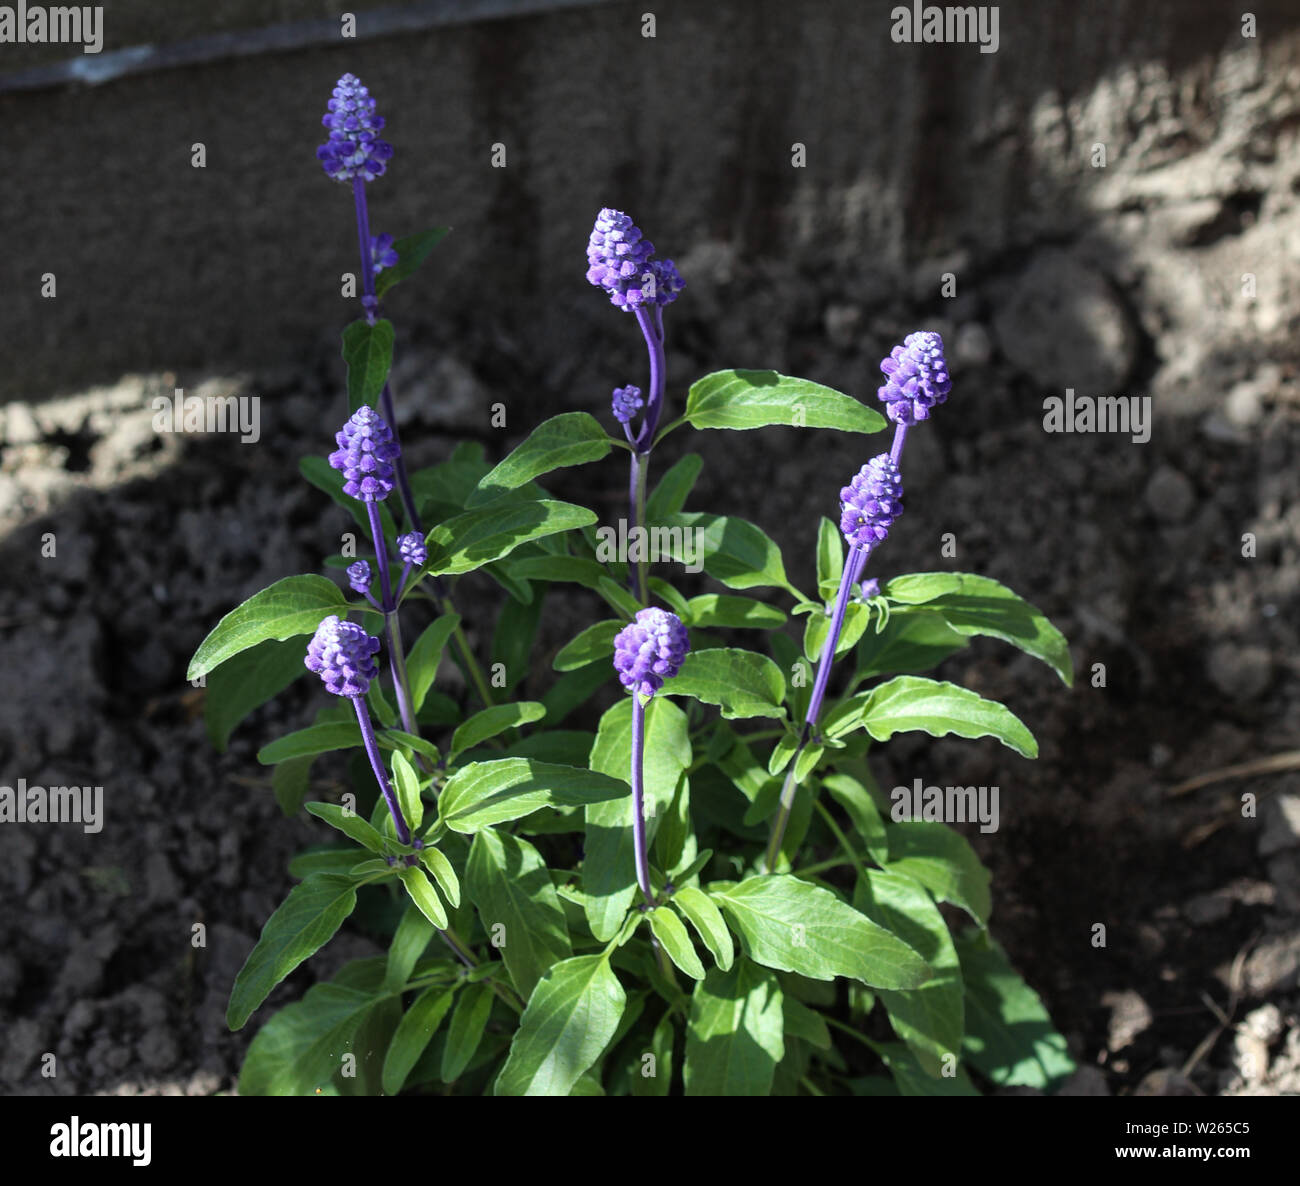 mealycup sage or mealy sage (Salvia farinacea) Stock Photo